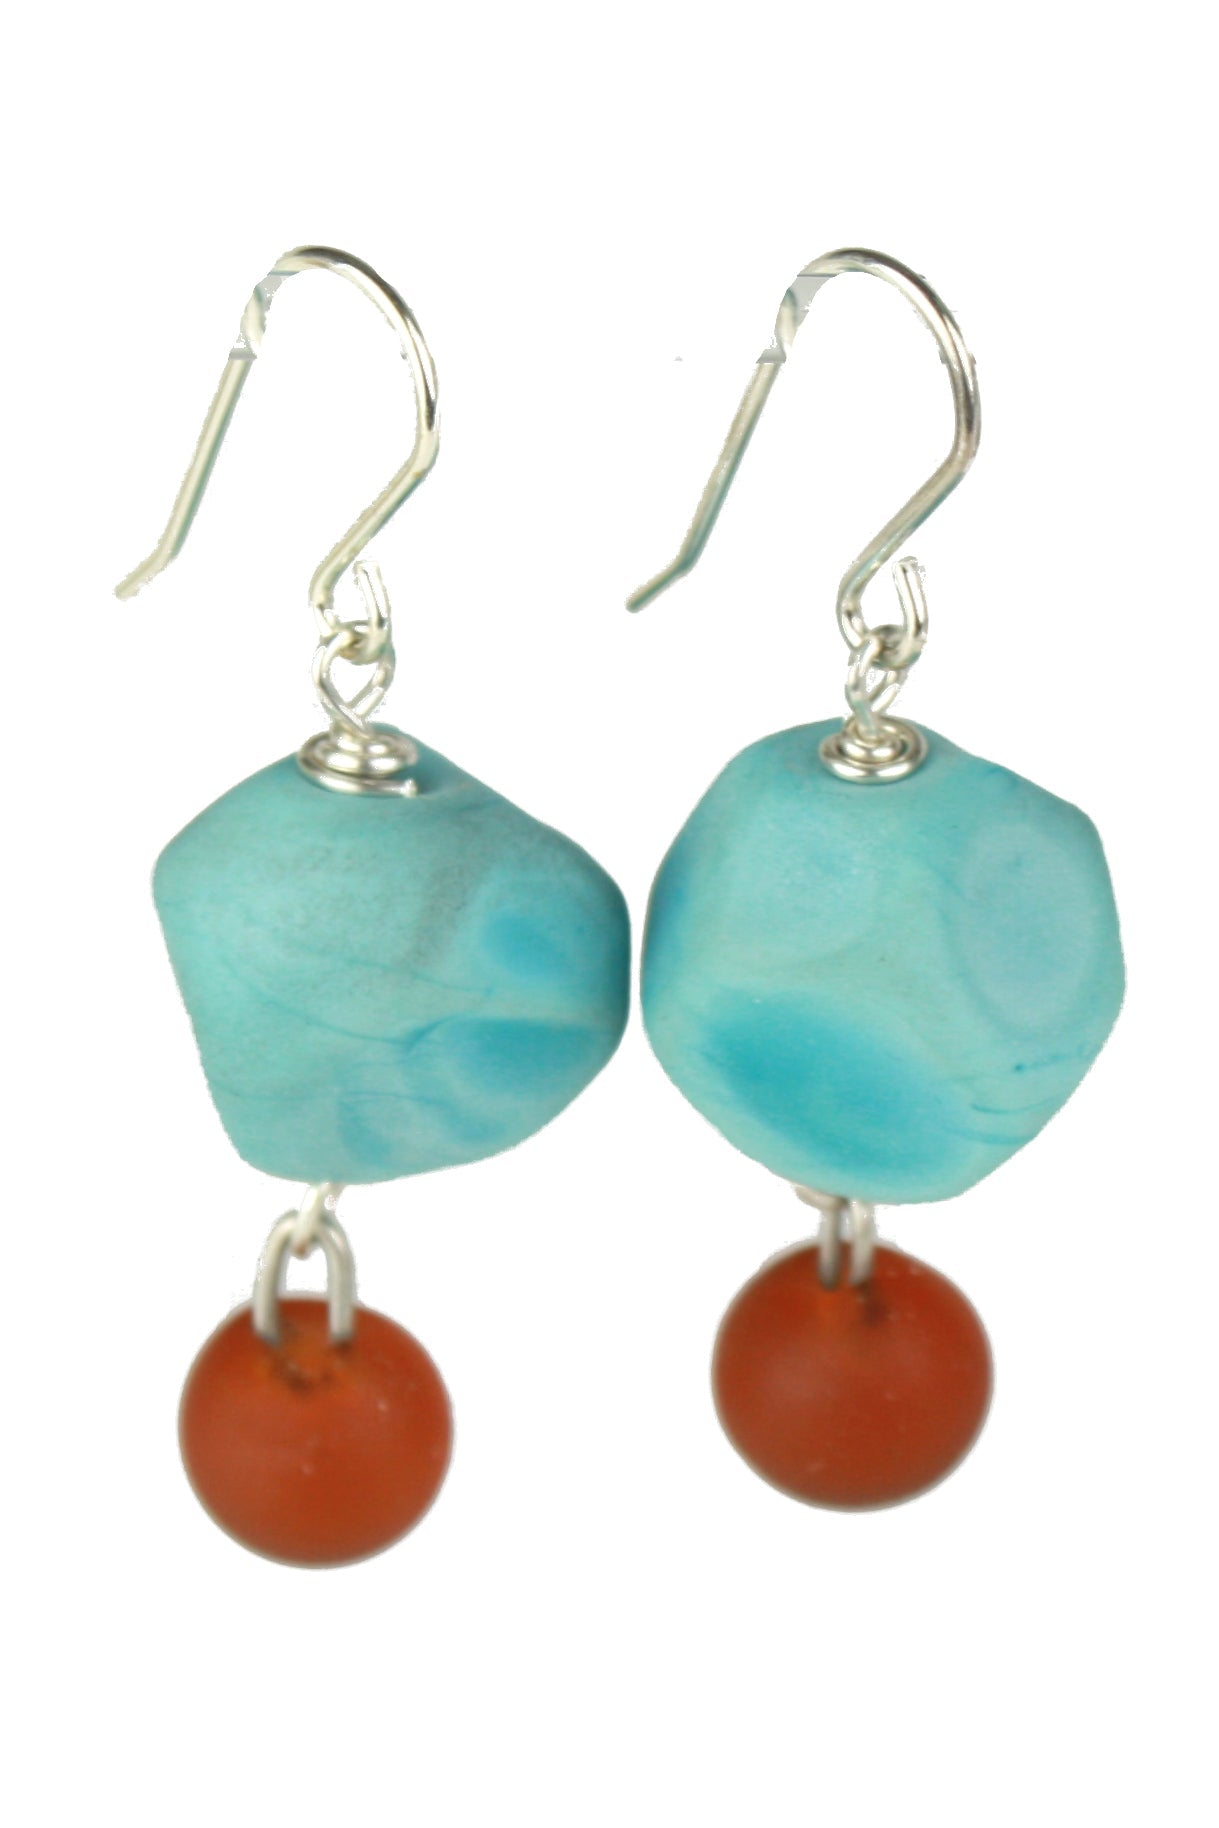 Nugget earrings featuring hand crafted turquoise glass hand faceted beads with a small amber glass charm